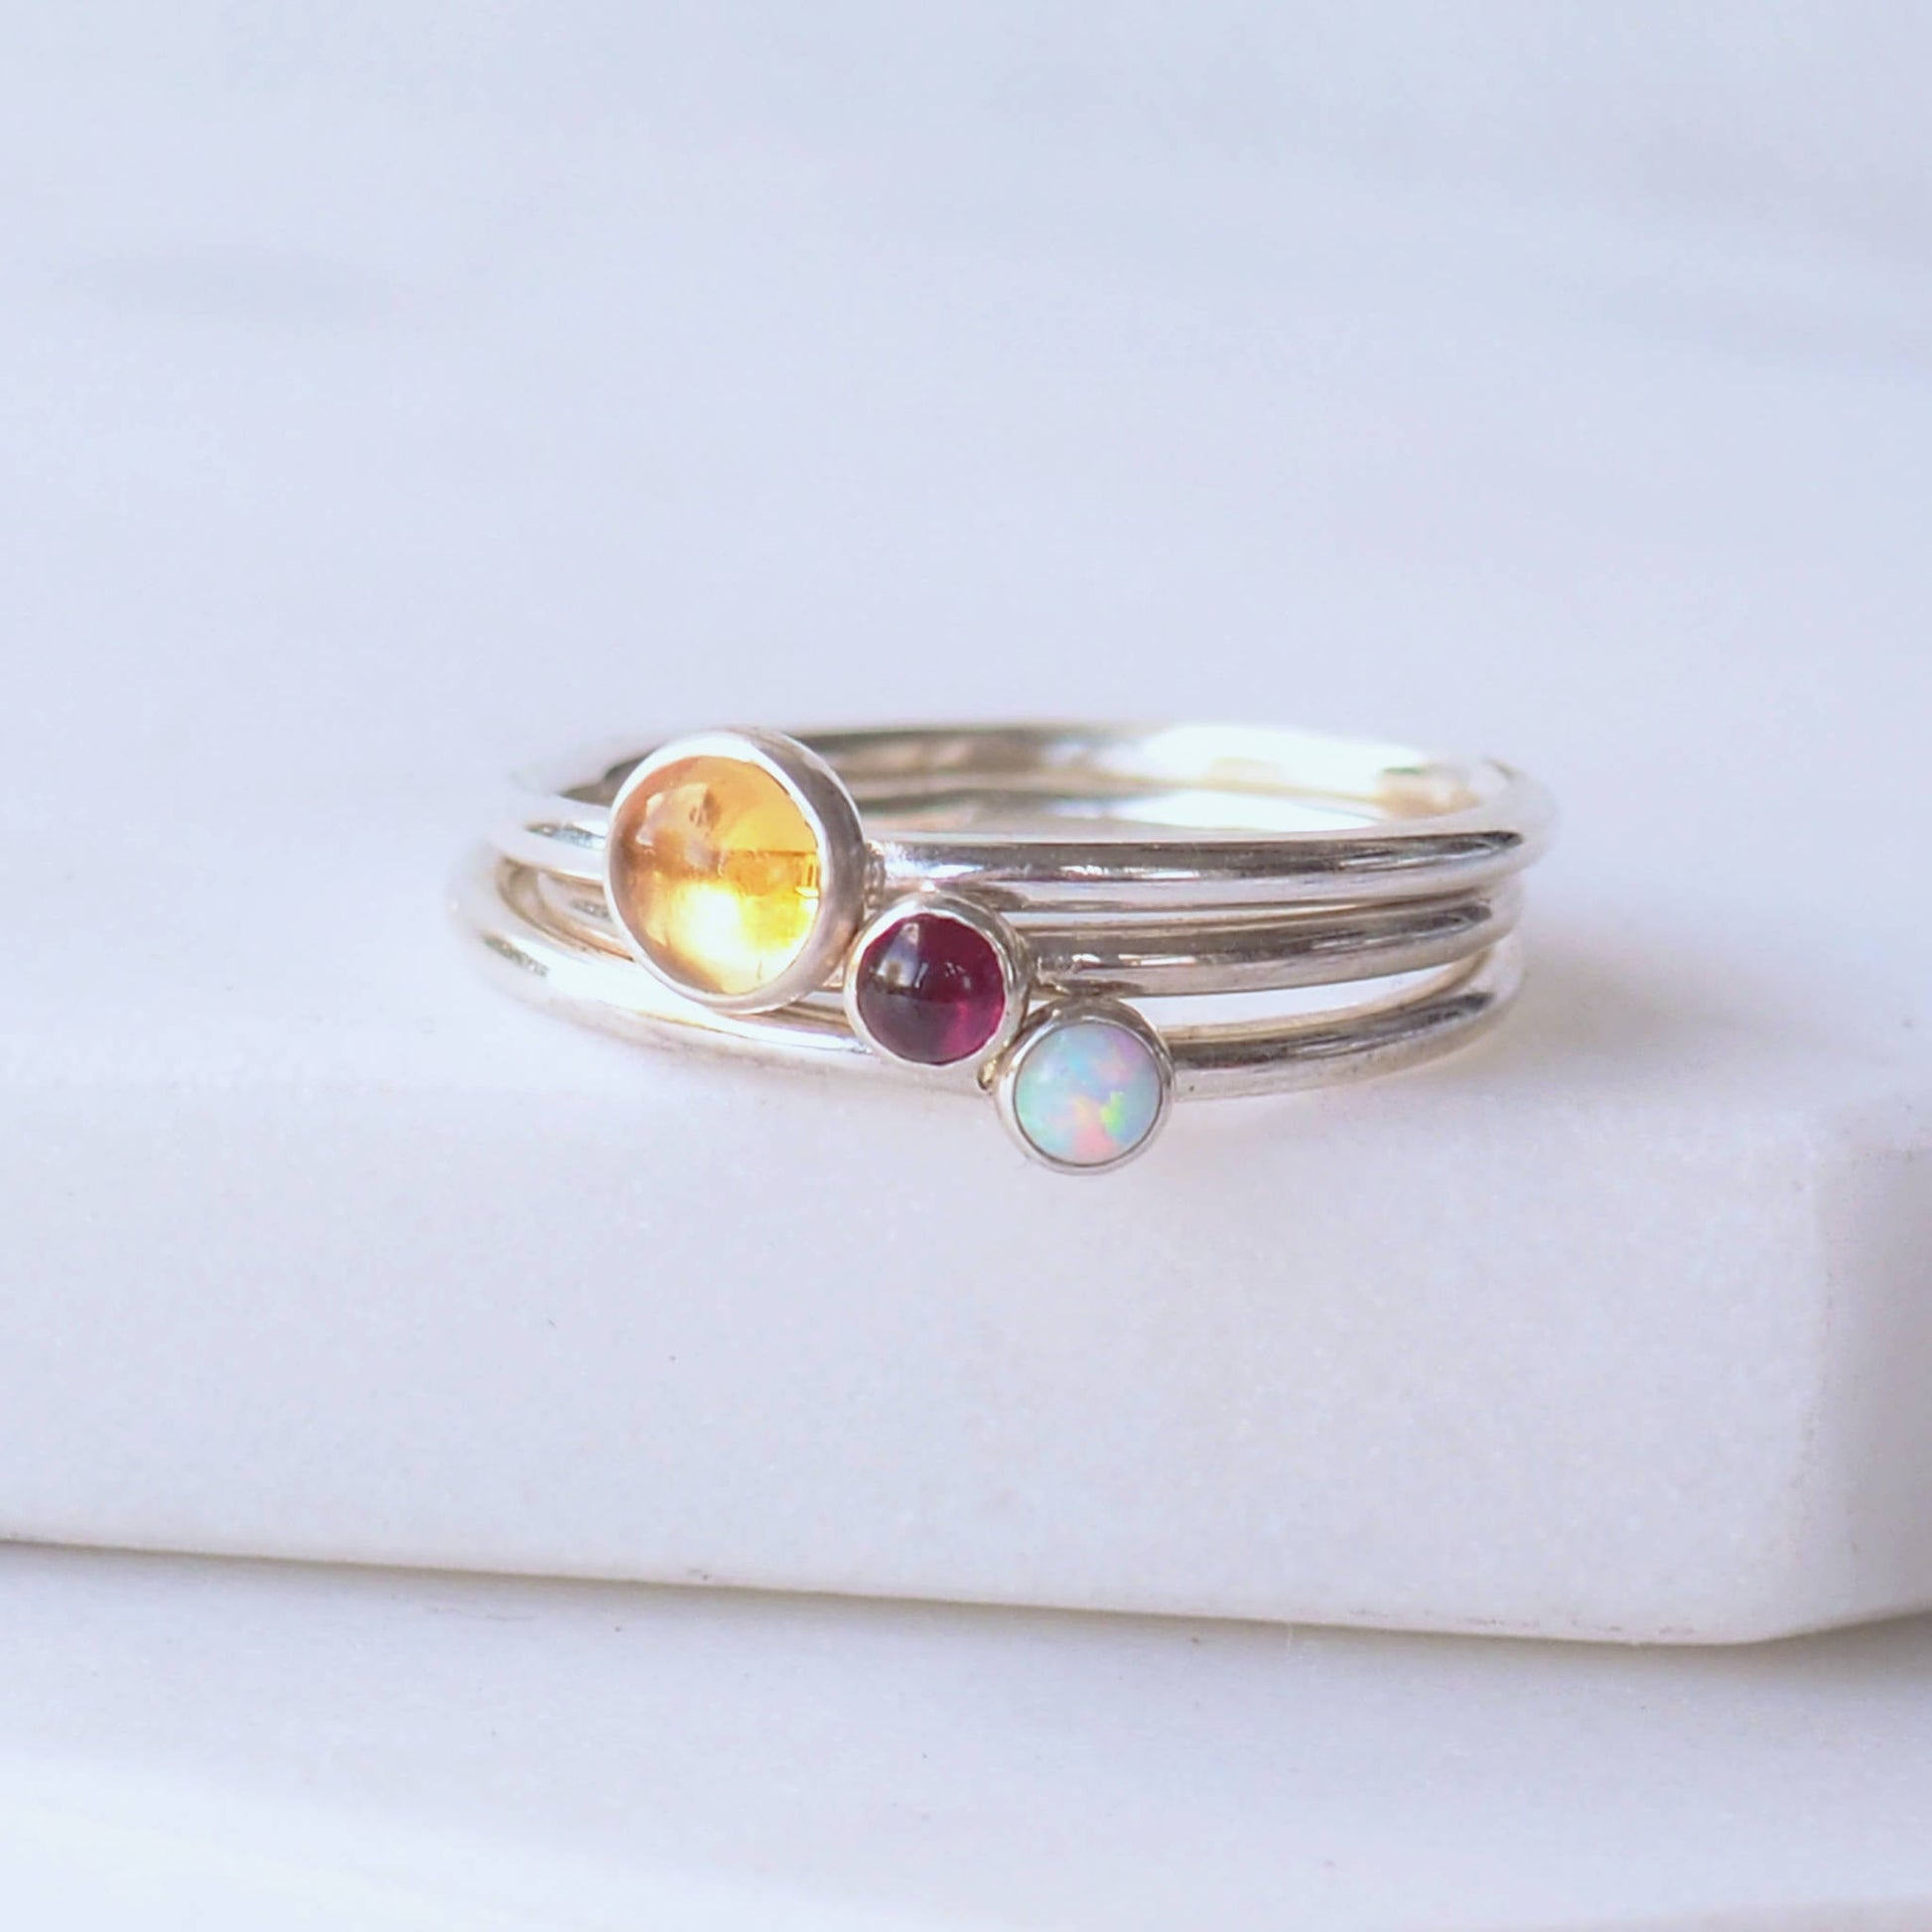 Three Silver birthstone rings with a large round Yellow Citrine for November with two additional birthstone rings of your choice, picture shows deep red garnet and white lab opal. Handmade by maram jewellery in Scotland UK